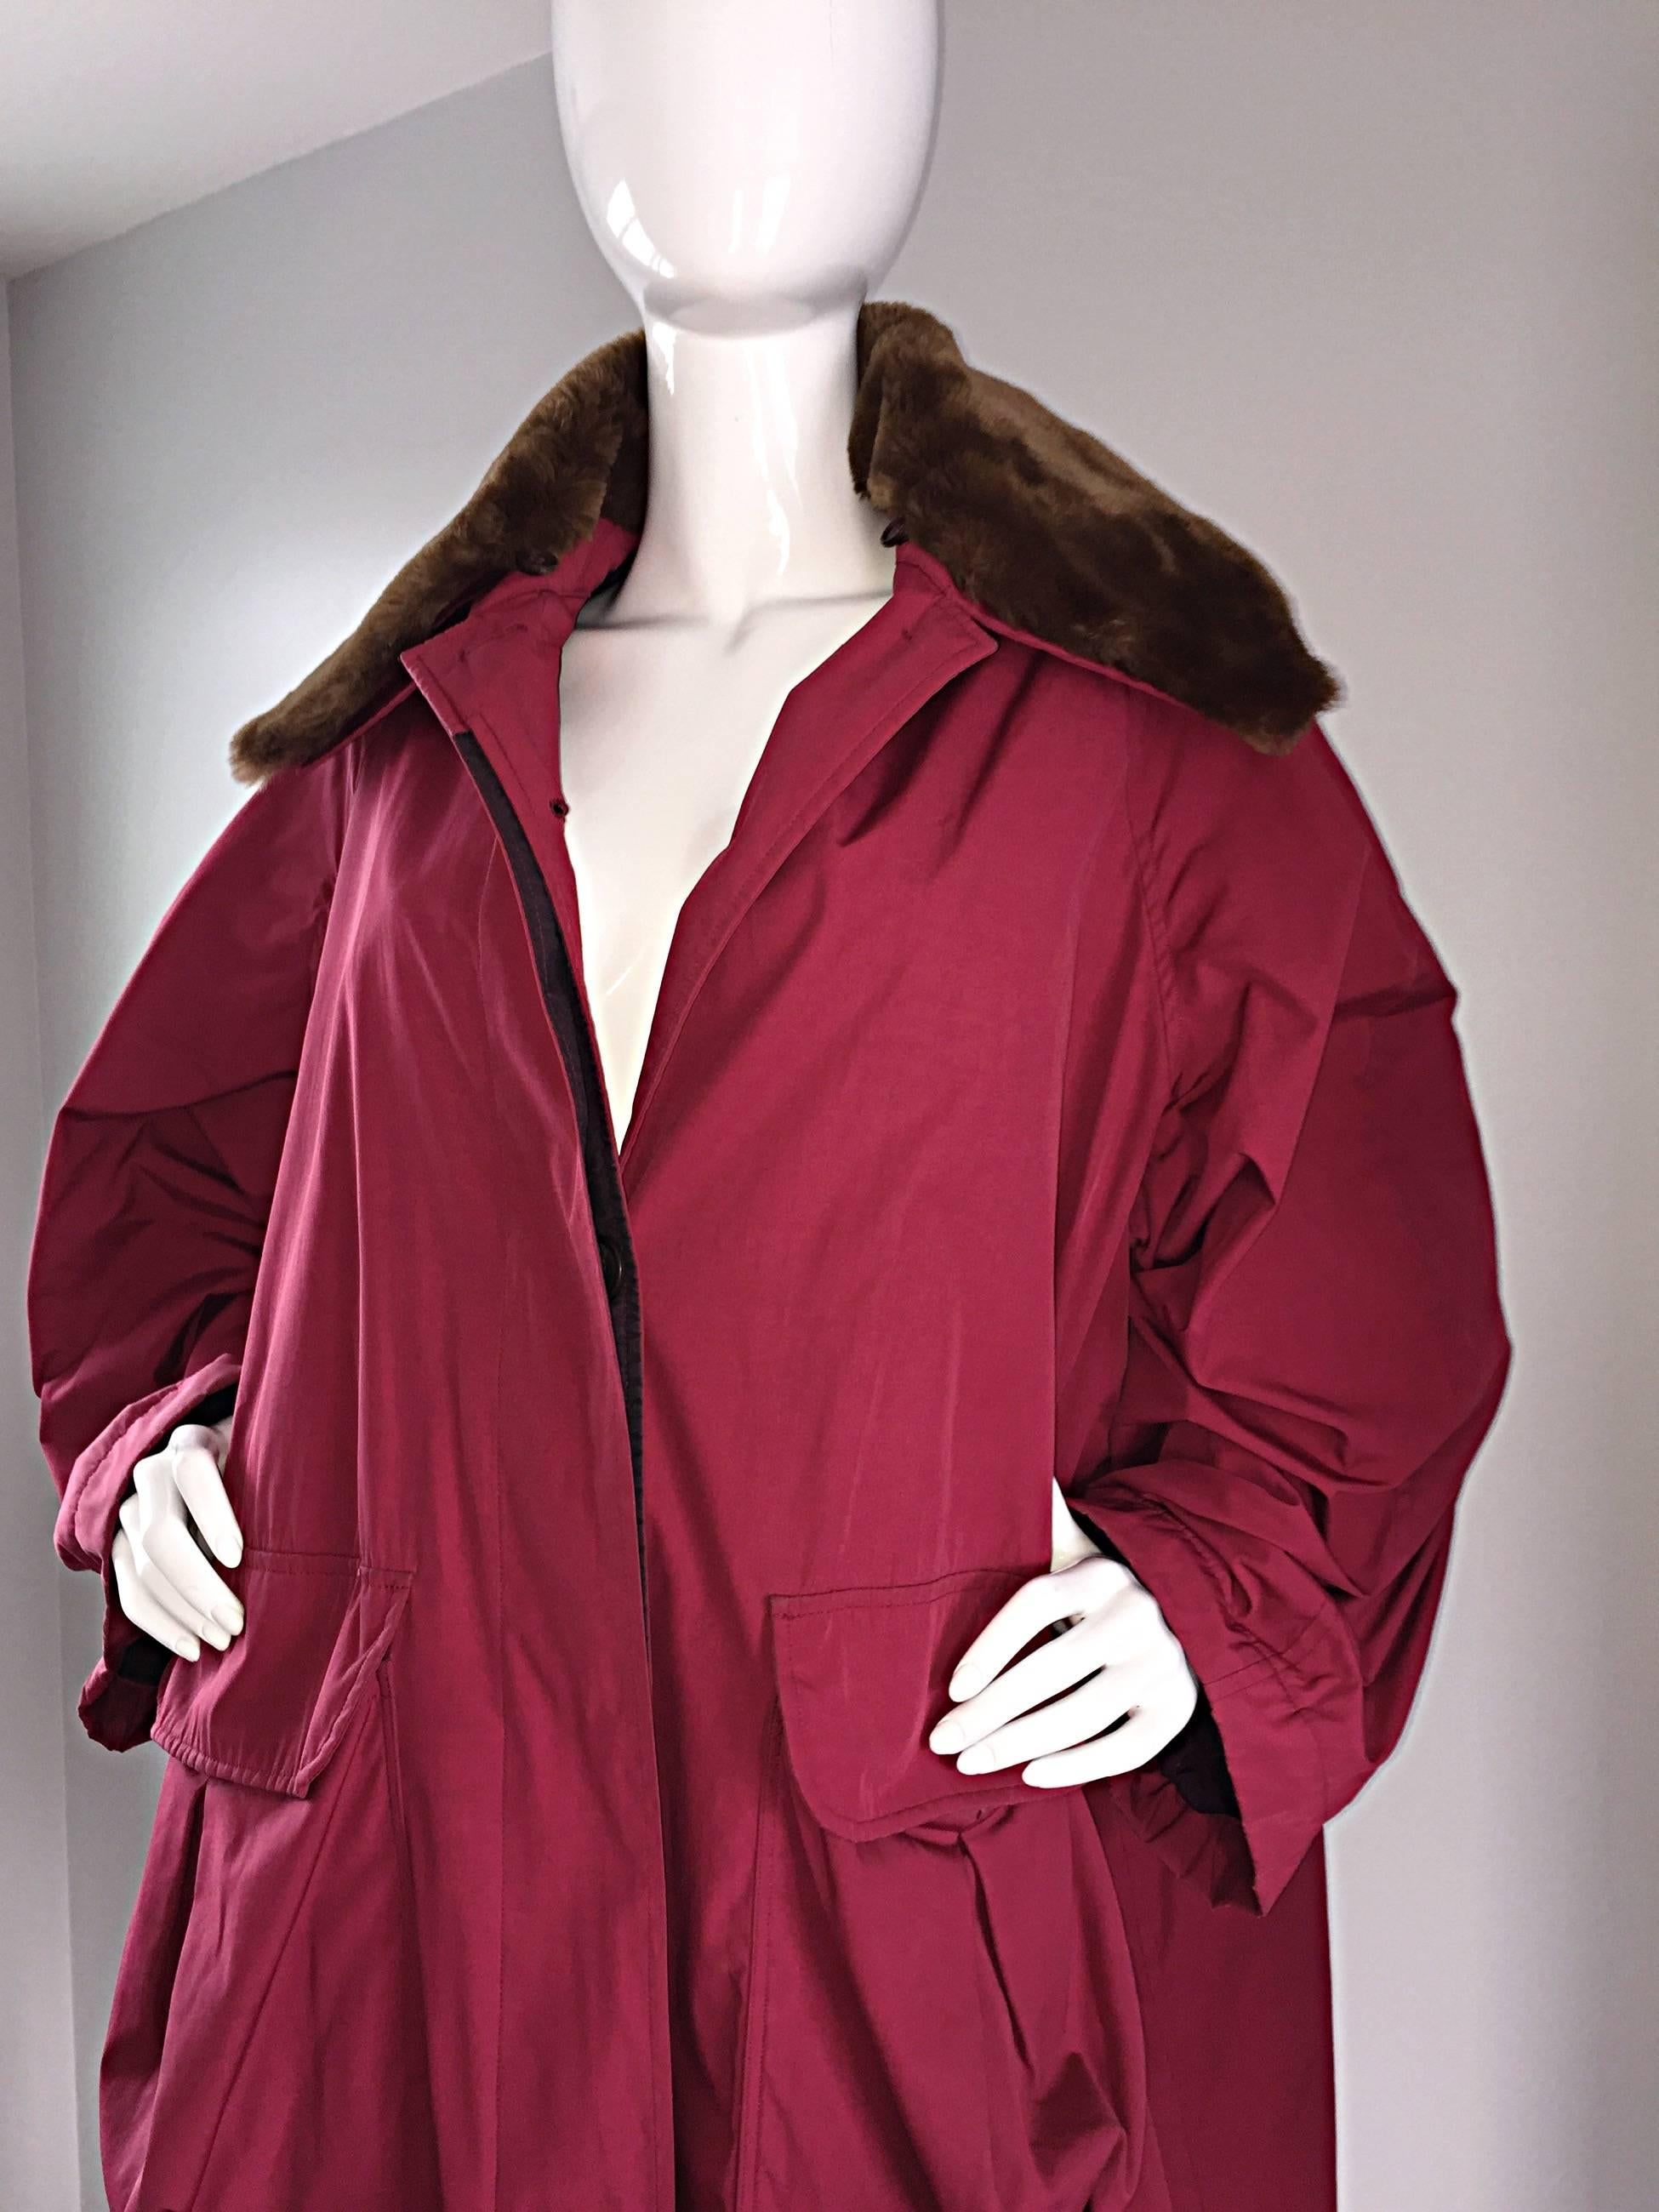 Vintage Romeo Gigli Raspberry Red Cocoon Coat w/ Detachable Faux Fur Collar 5